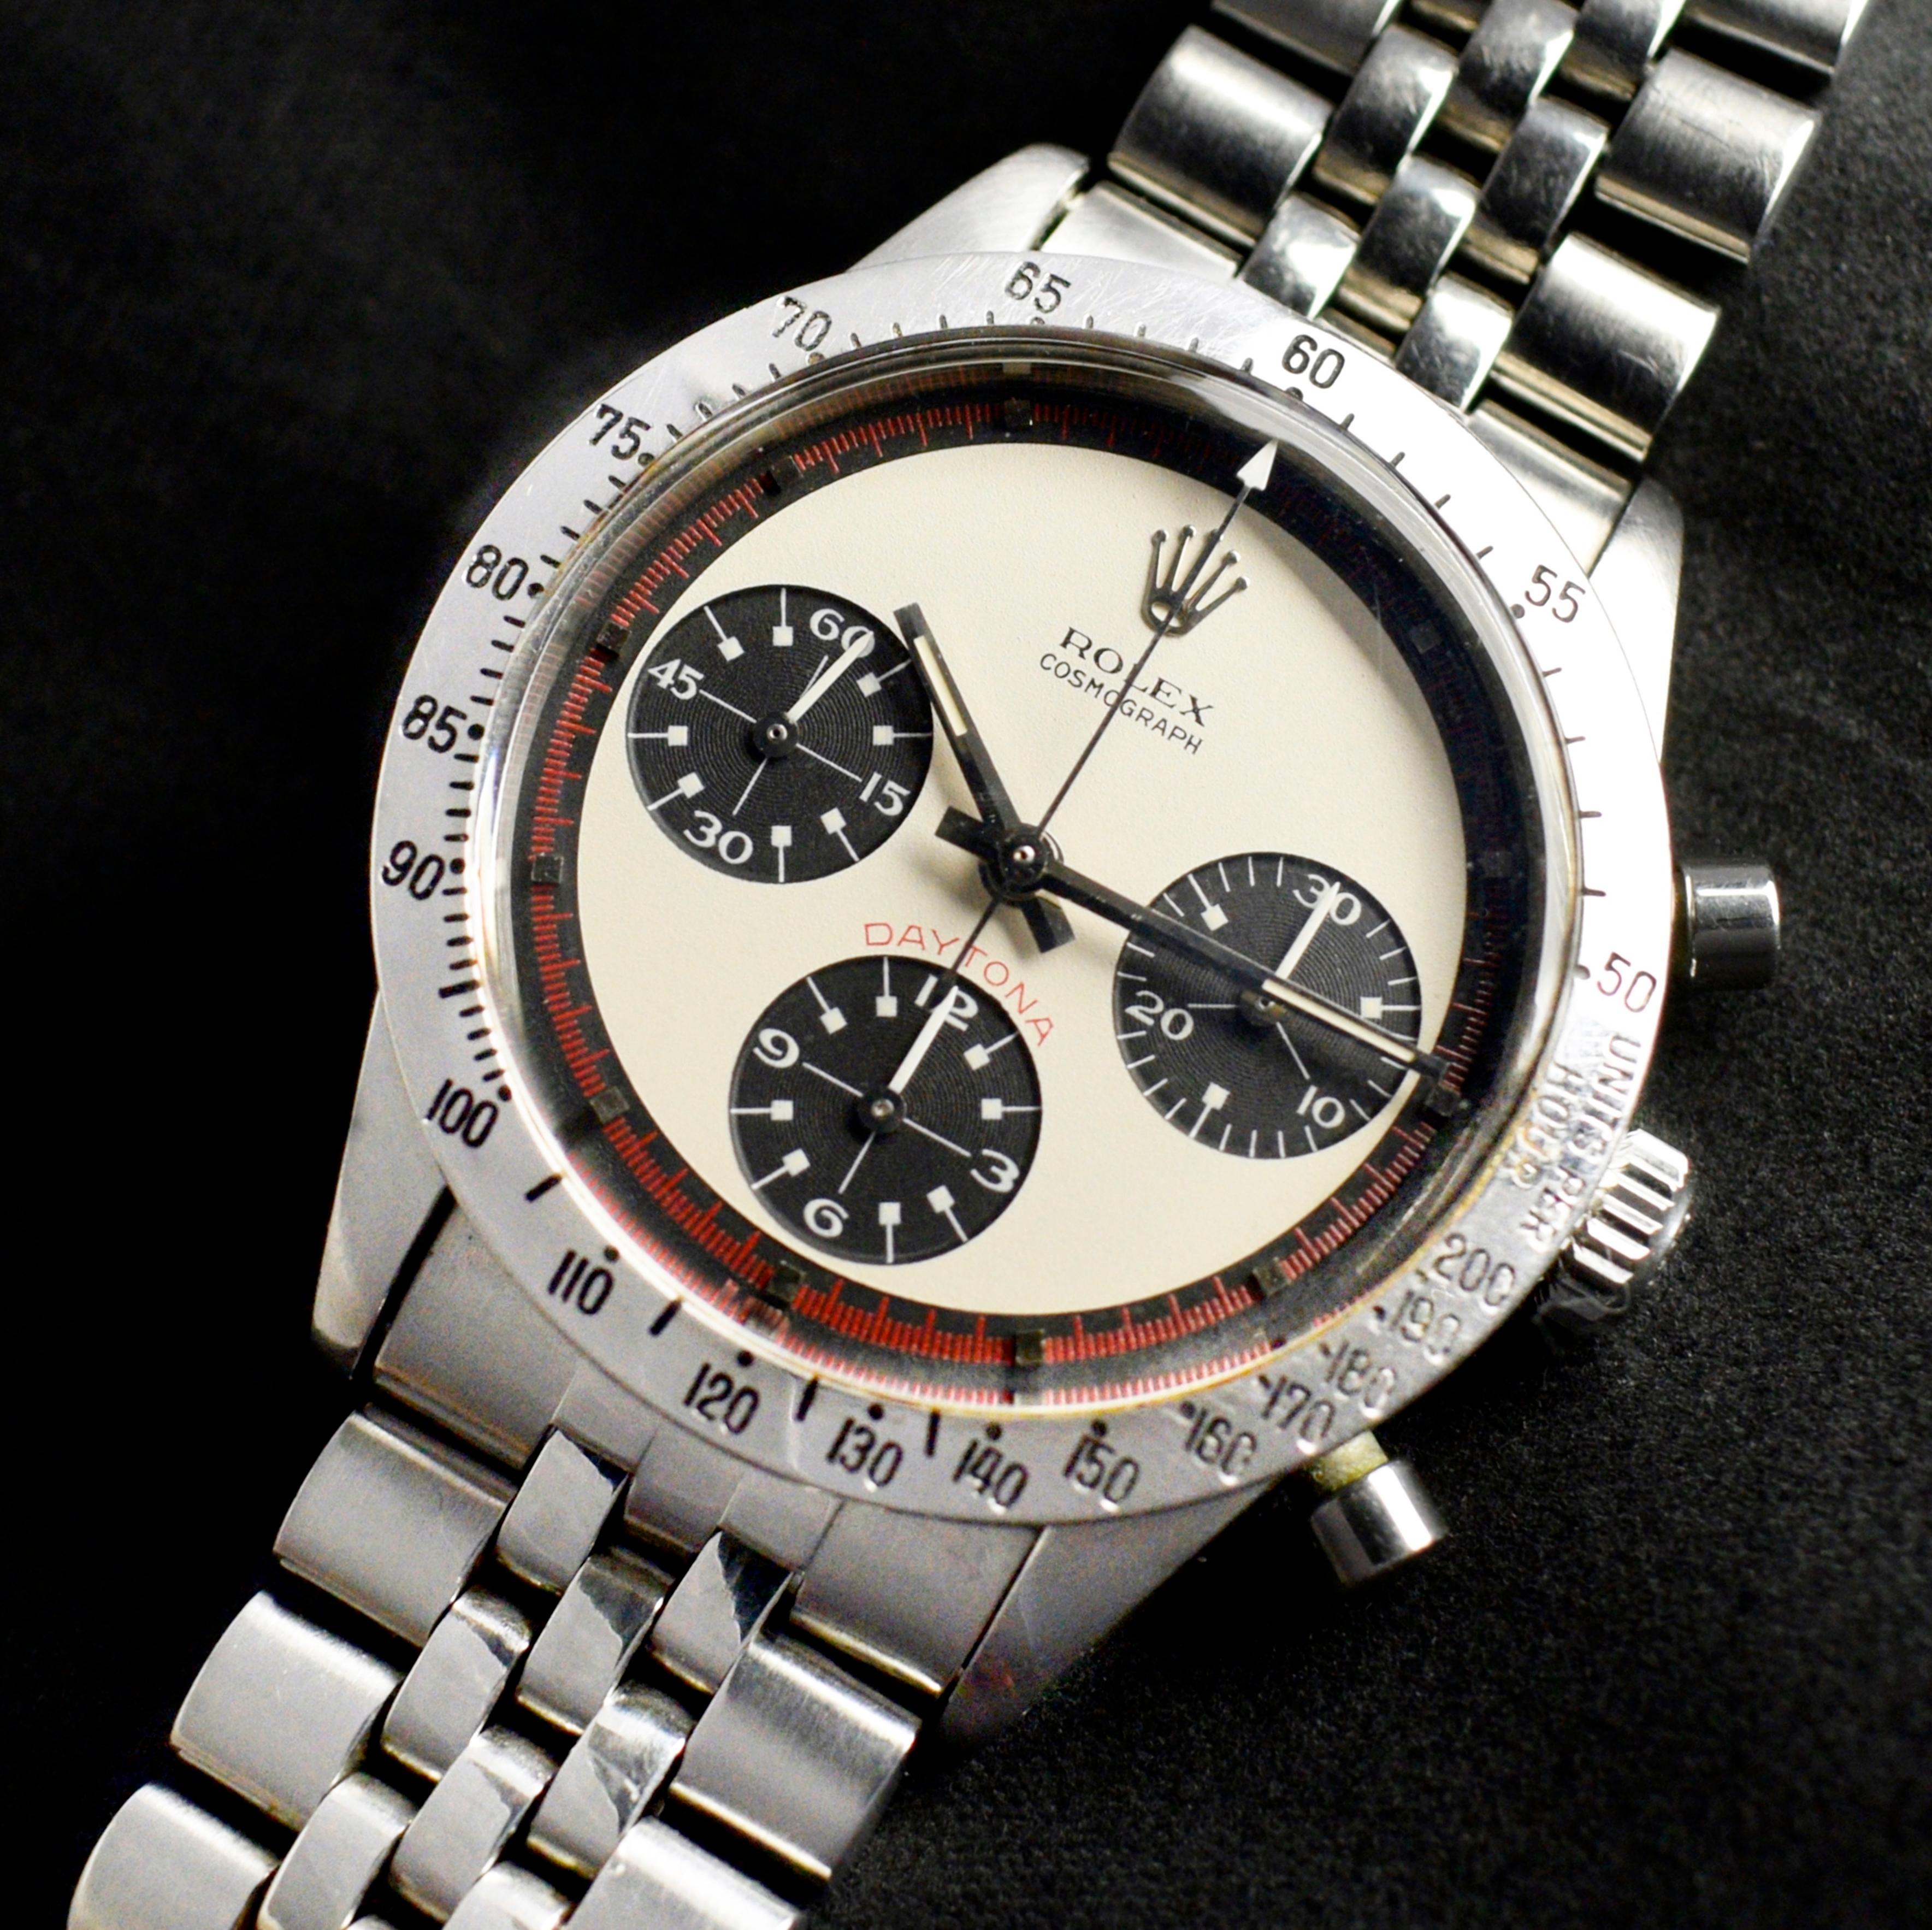 Brand: Vintage Rolex
Model: 6239
Year: 1968 – 1969
Serial number: 195xxxx
Reference: OT1592

Reference 6239, the very first model of the celebrated “Daytona” series, the first chronograph with the tachometre scale engraved on the bezel. The dials of